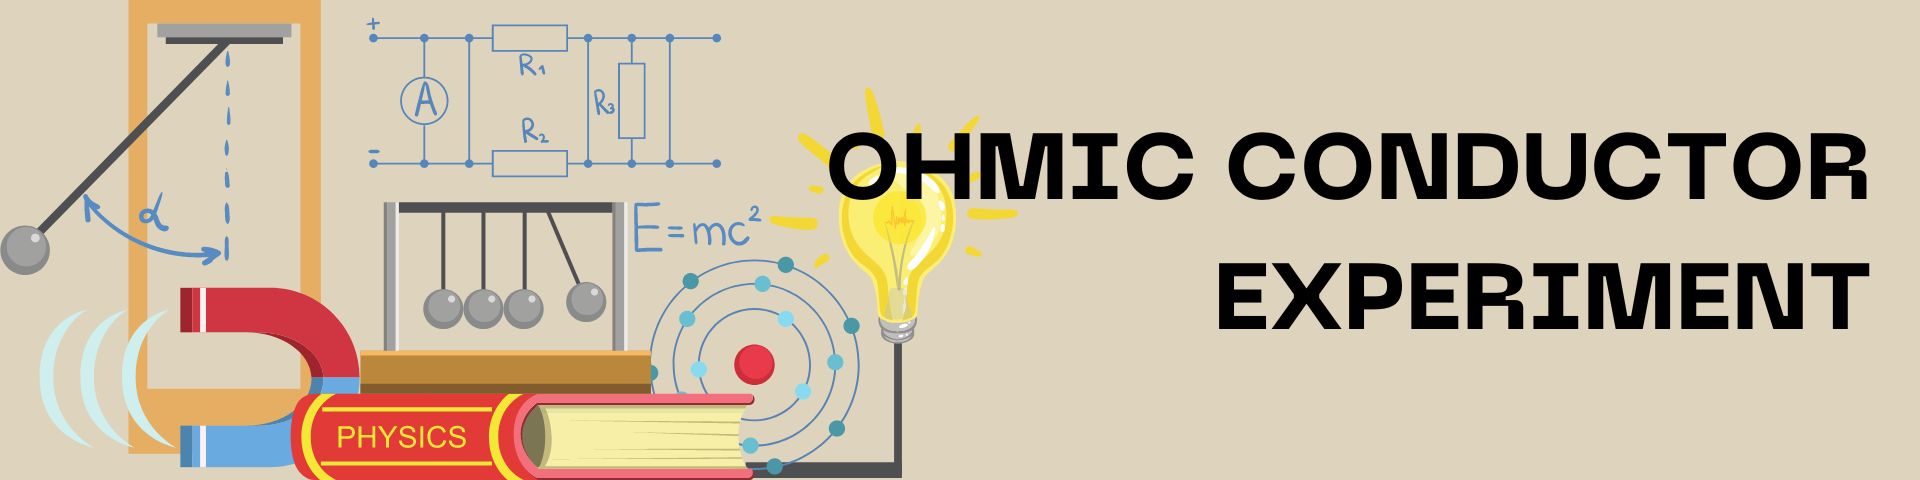 Ohmic Conductor Experiment